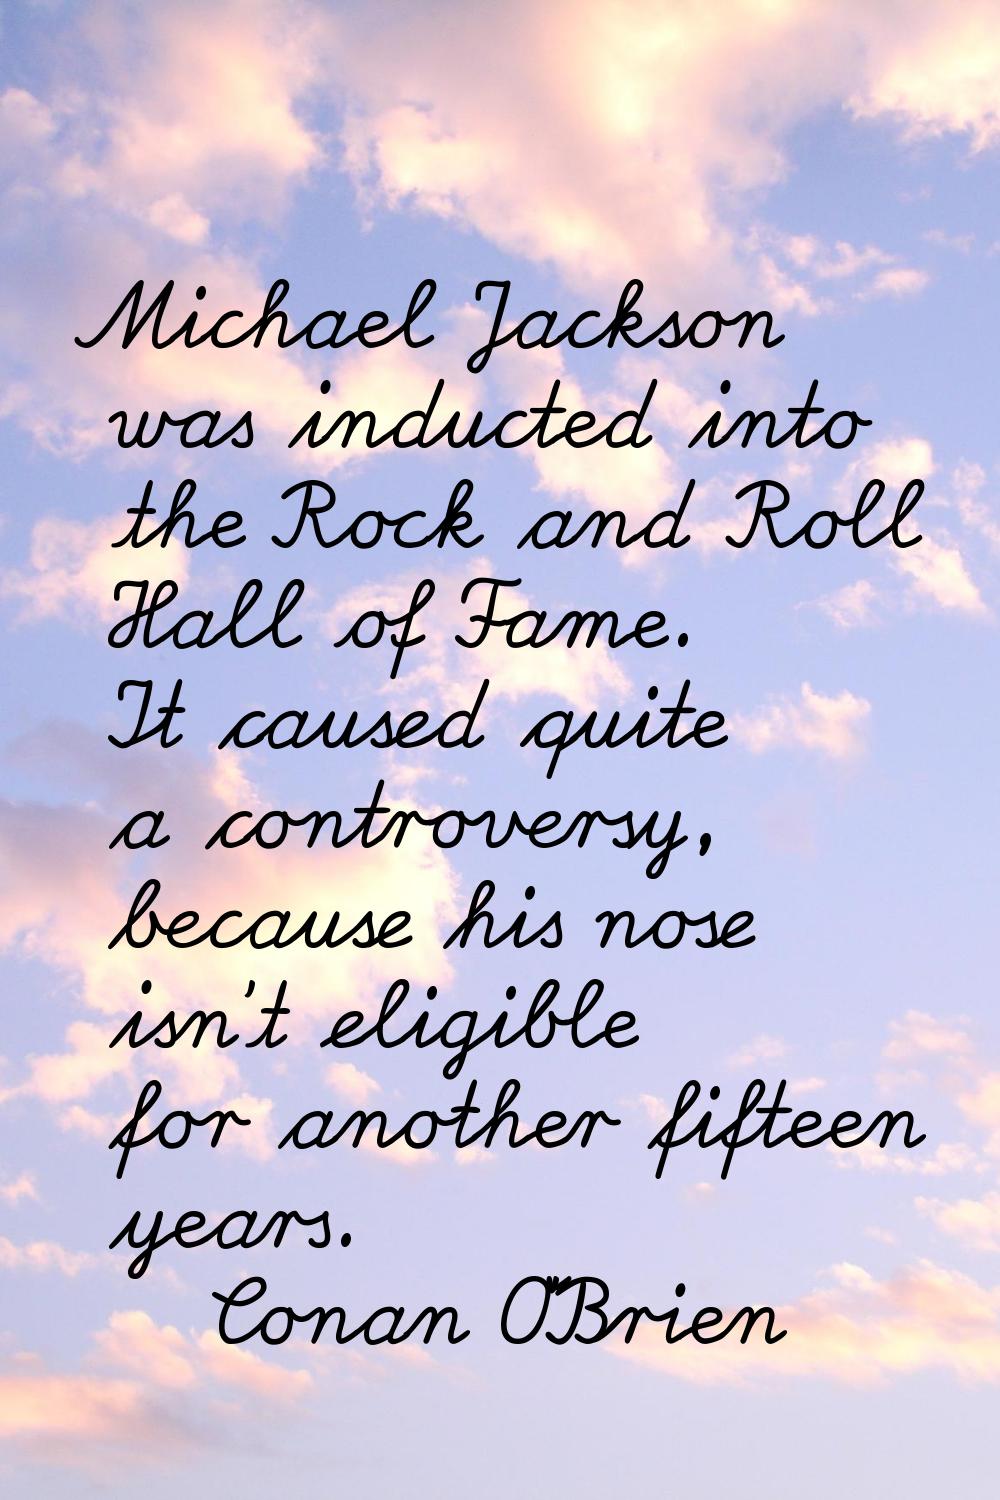 Michael Jackson was inducted into the Rock and Roll Hall of Fame. It caused quite a controversy, be